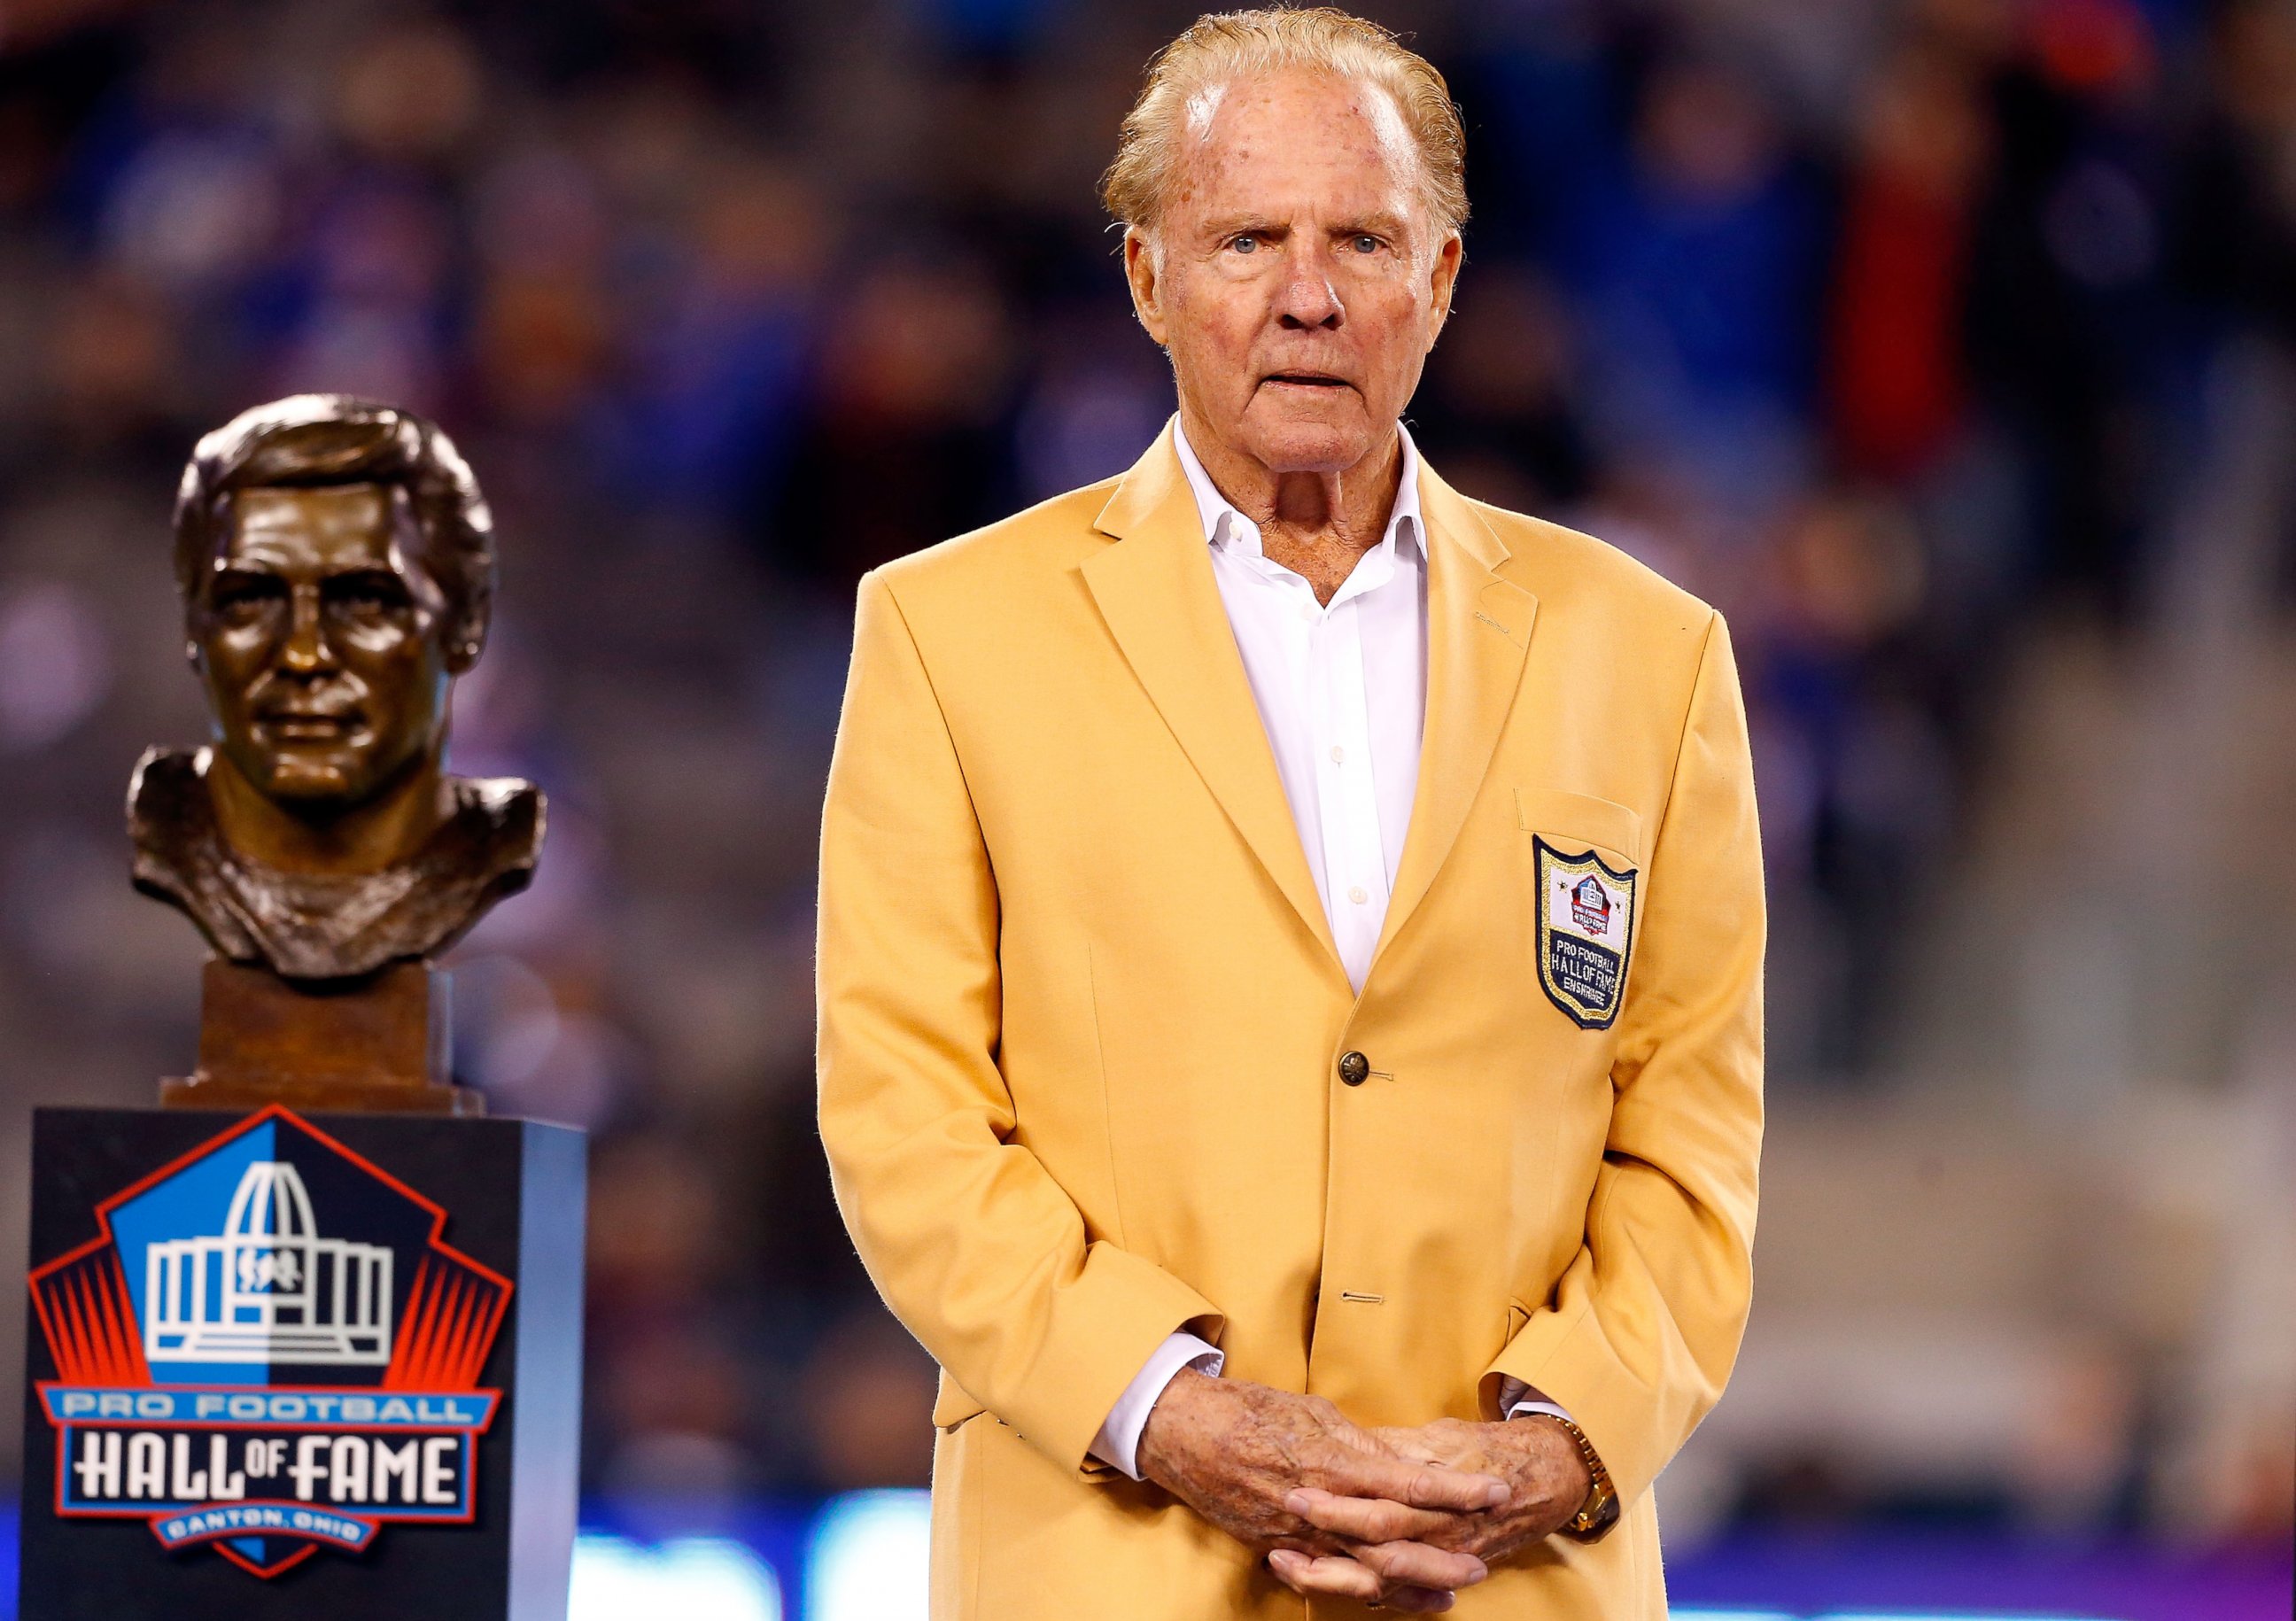 PHOTO: Hall of Famer Frank Gifford looks on during a halftime ceremony of a game between the New York Giants and the Indianapolis Colts at MetLife Stadium in East Rutherford, N.J., Nov. 3, 2014. 